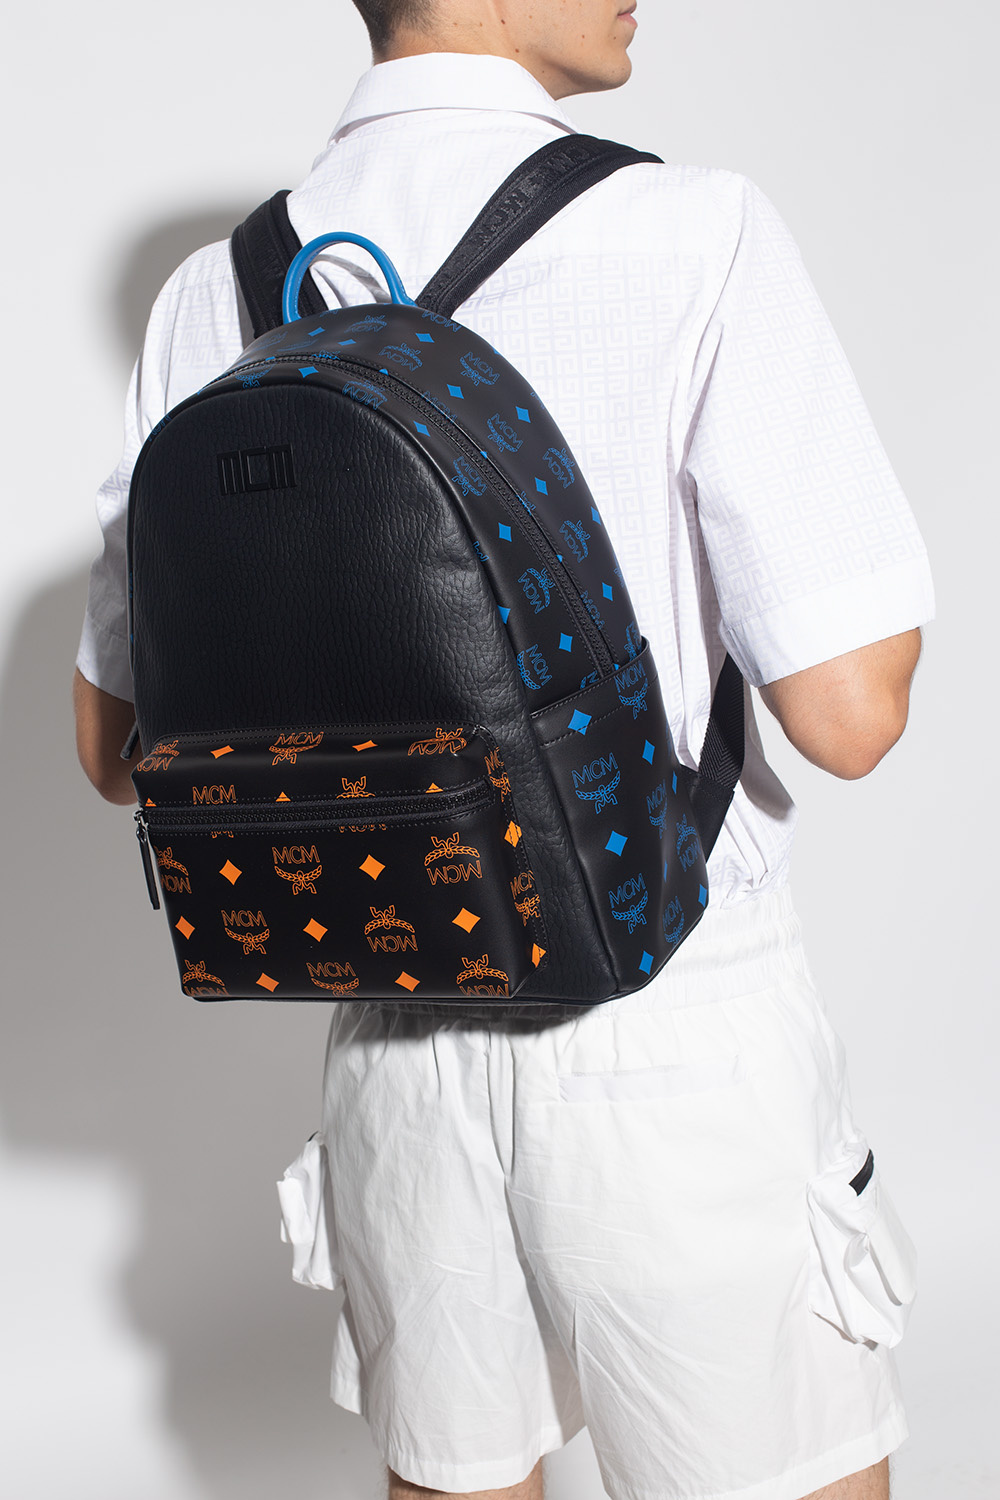 Download Man With MCM Backpack Wallpaper